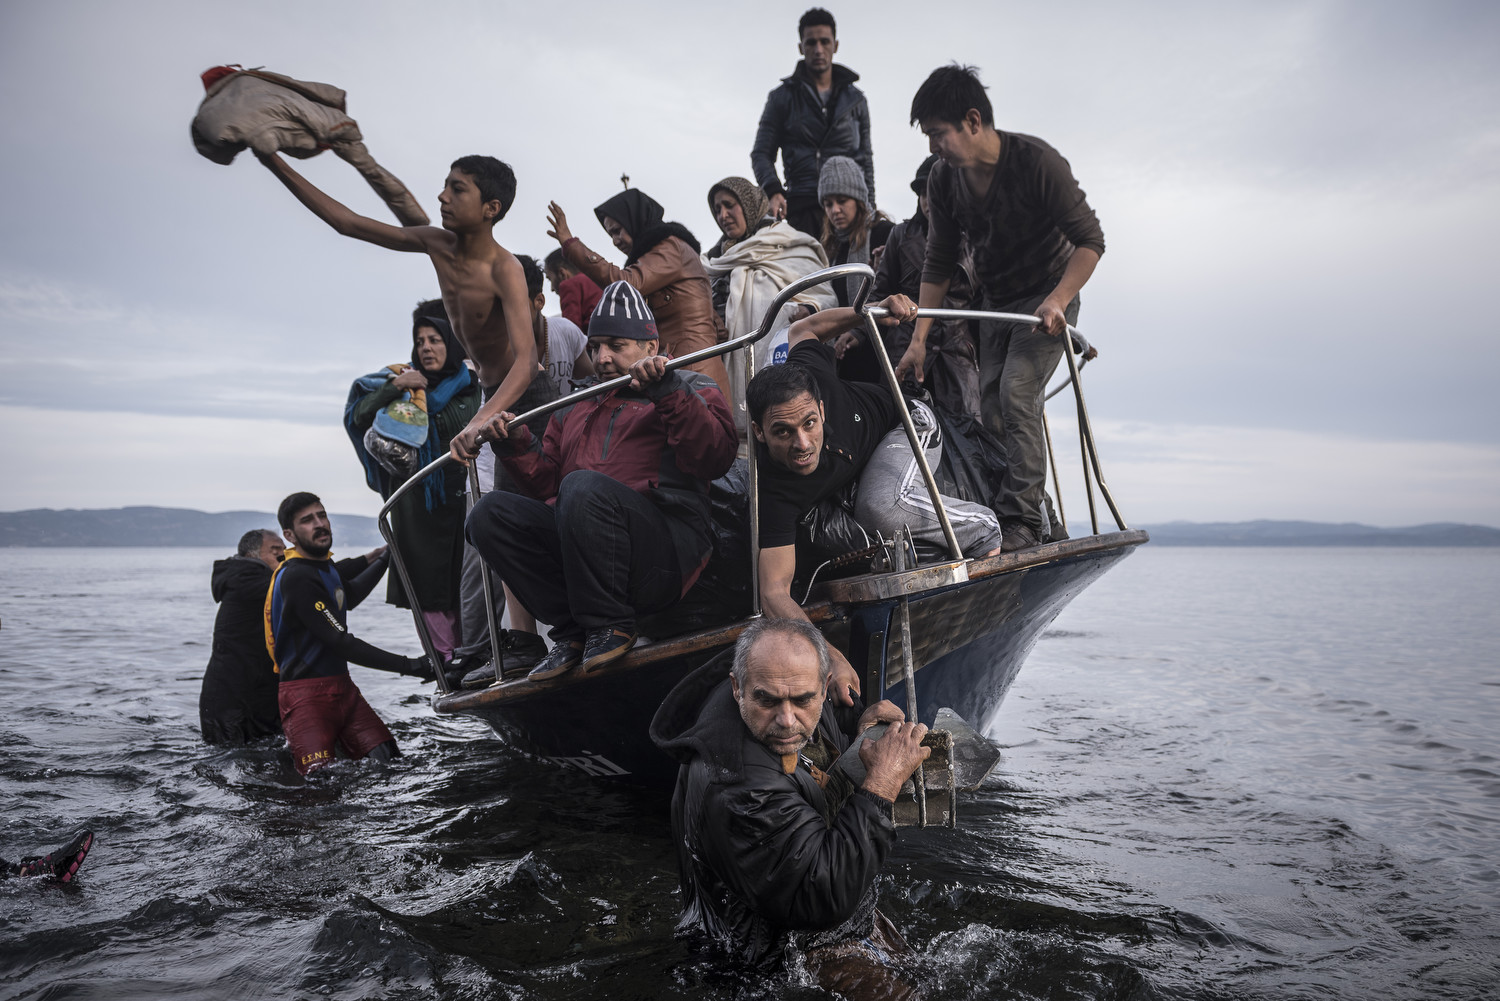 November 16, 2015. Refugees arrive by boat on the Greek island of Lesbos. This photo won first prize in the 2016 World Press Photo Awards for general news, stories. Photo by Sergey Ponomarev for the New York Times.